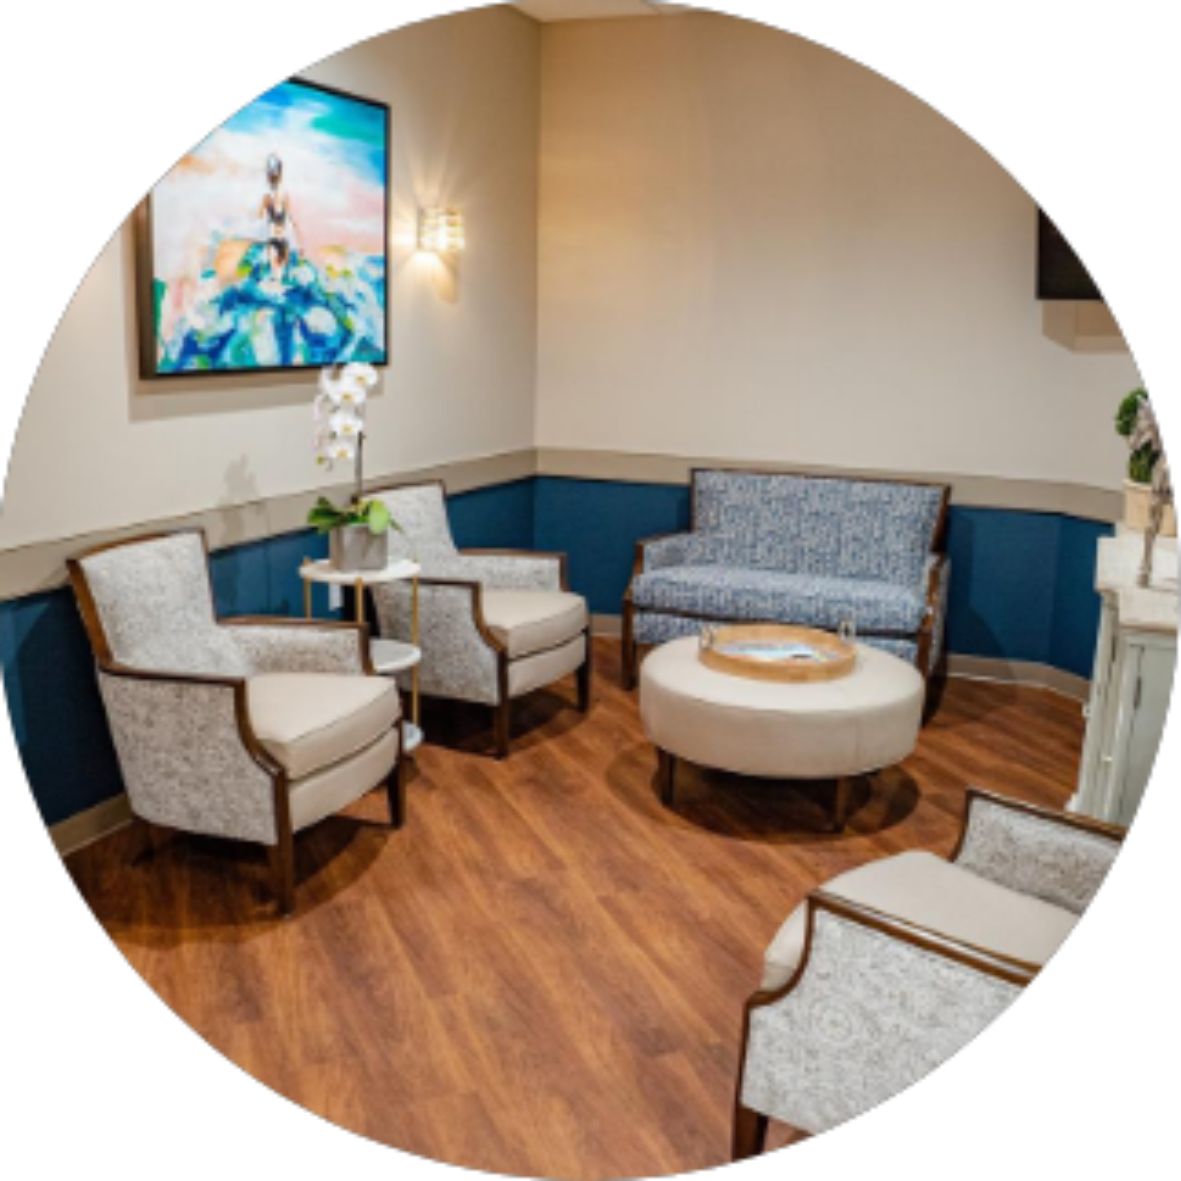 The Imaging Center lounge area